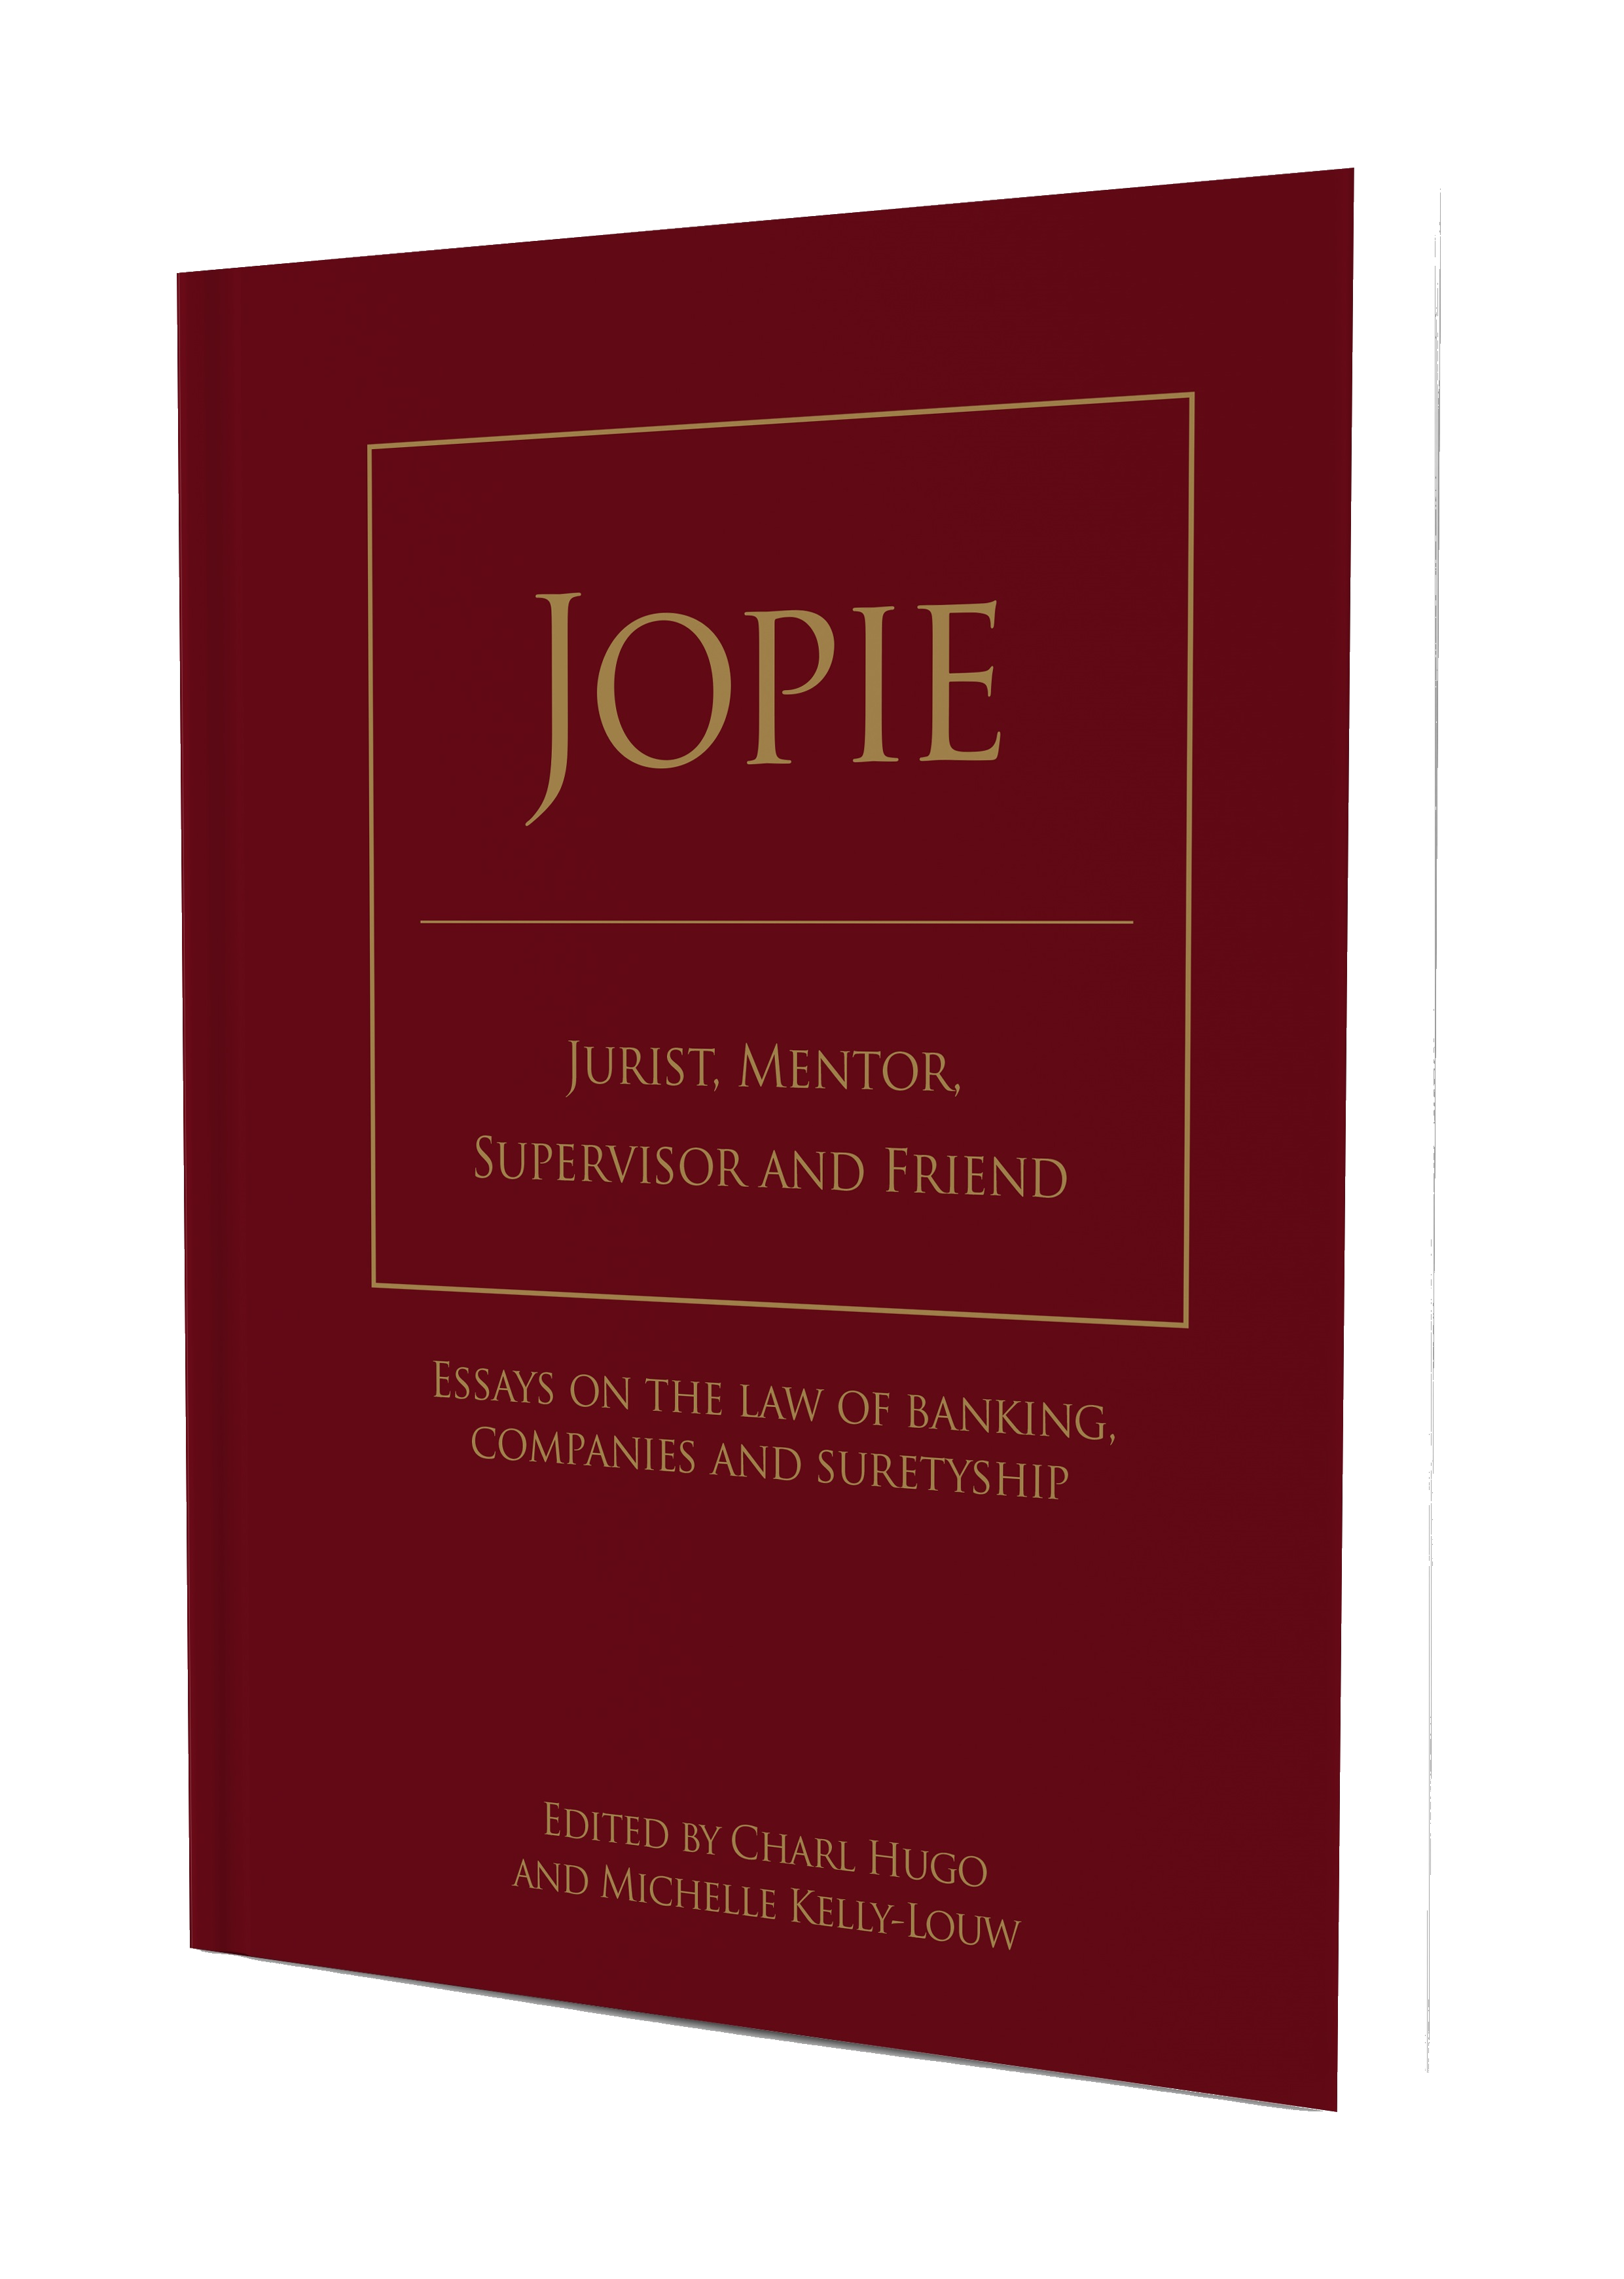 Jopie: Essays on the Law of Banking, Companies and Suretyship